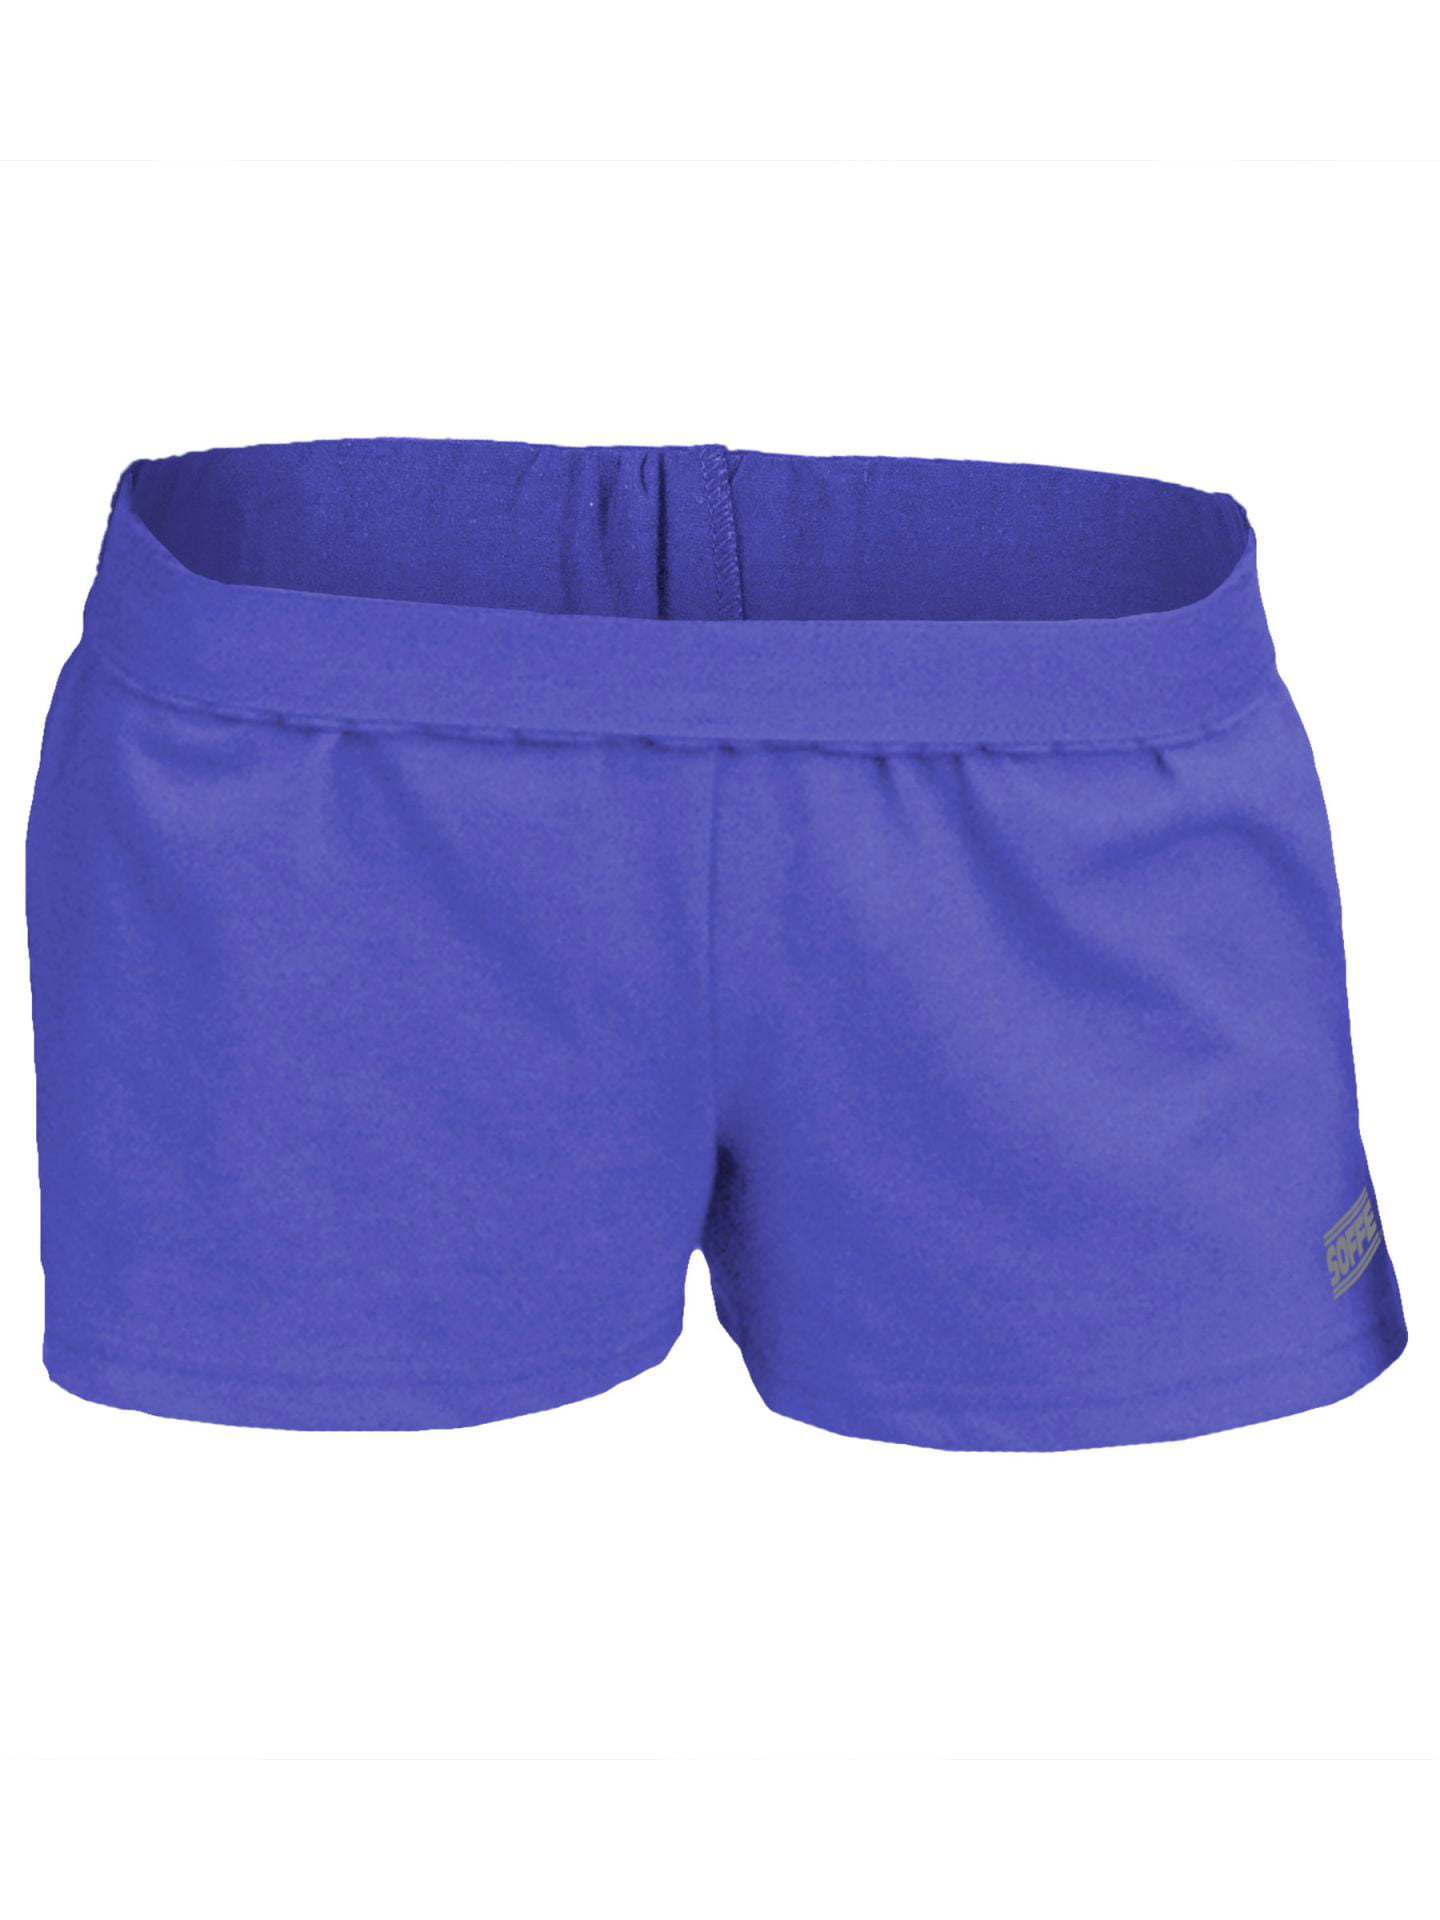 low rise shorts for juniors